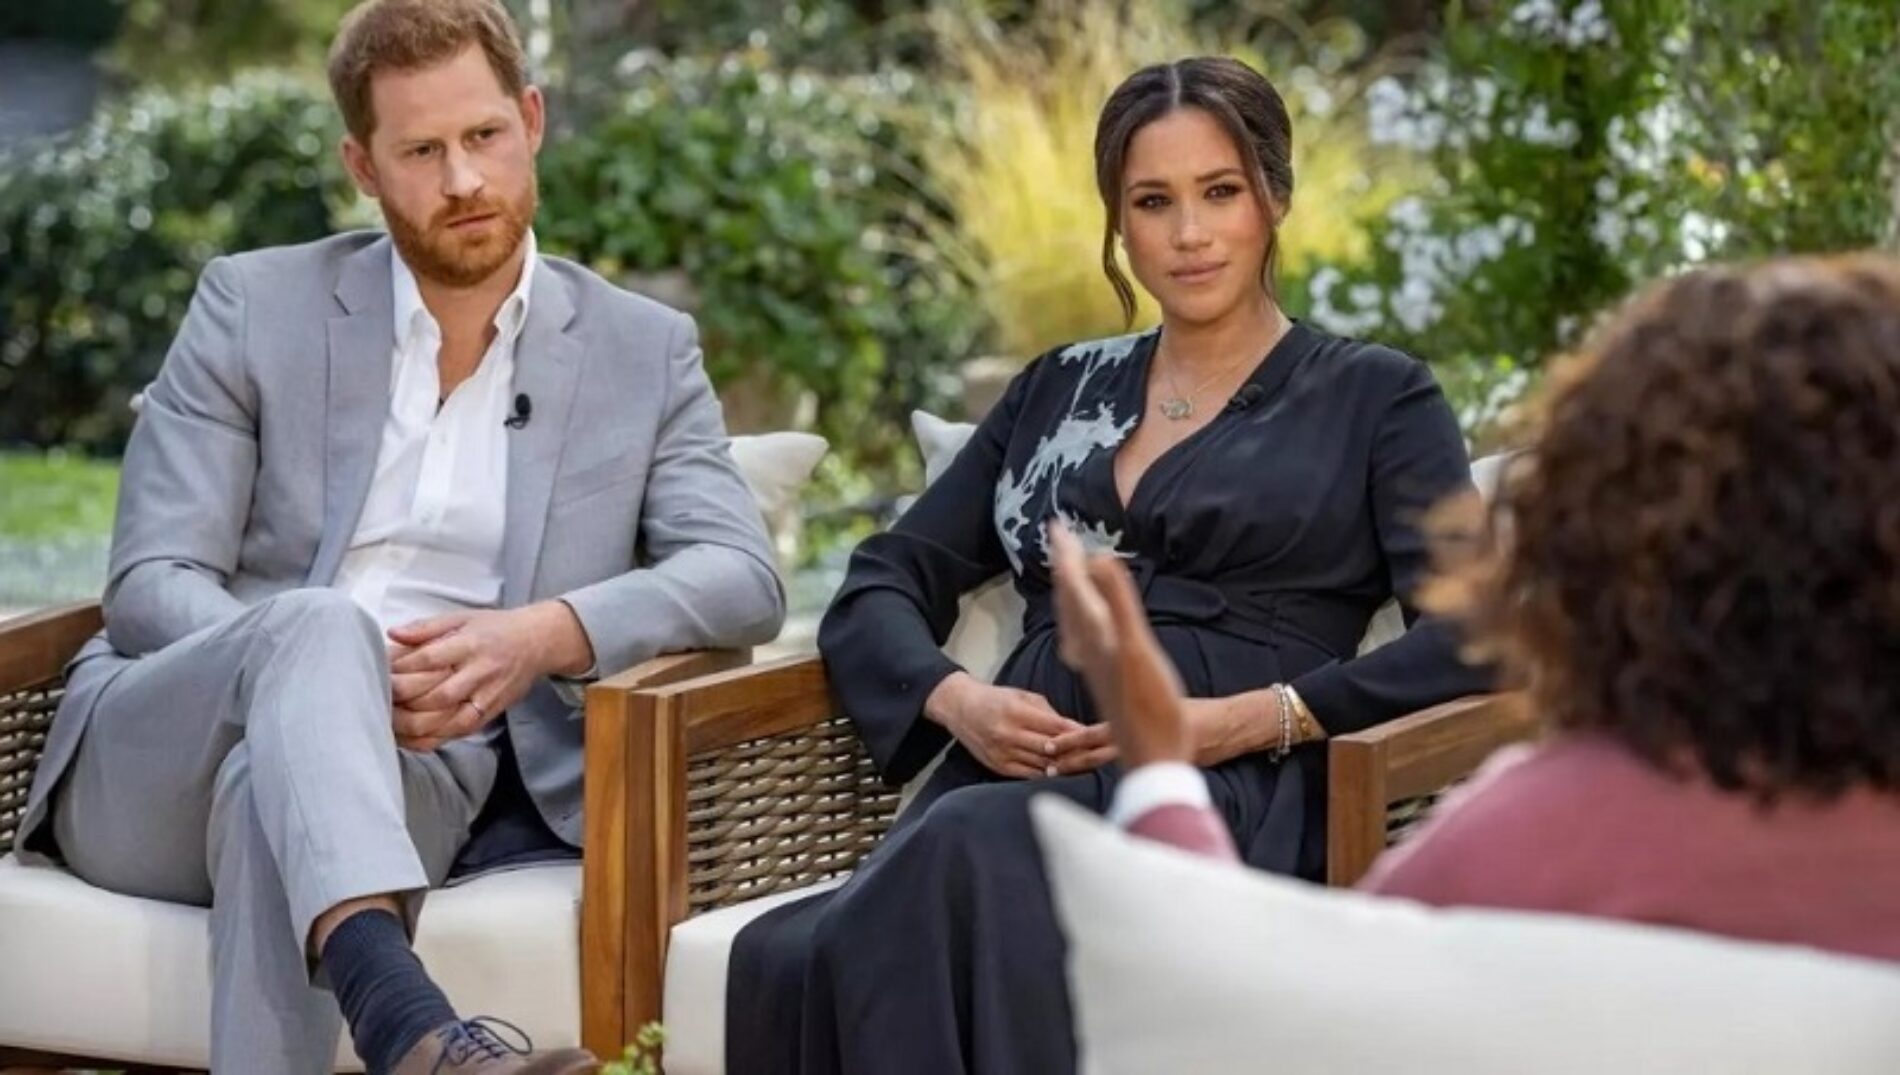 Prince Harry & Meghan Markle Reveal Race Concerns, Suicidal Thoughts, Megxit And New Baby’s Gender In Bombshell Oprah Interview